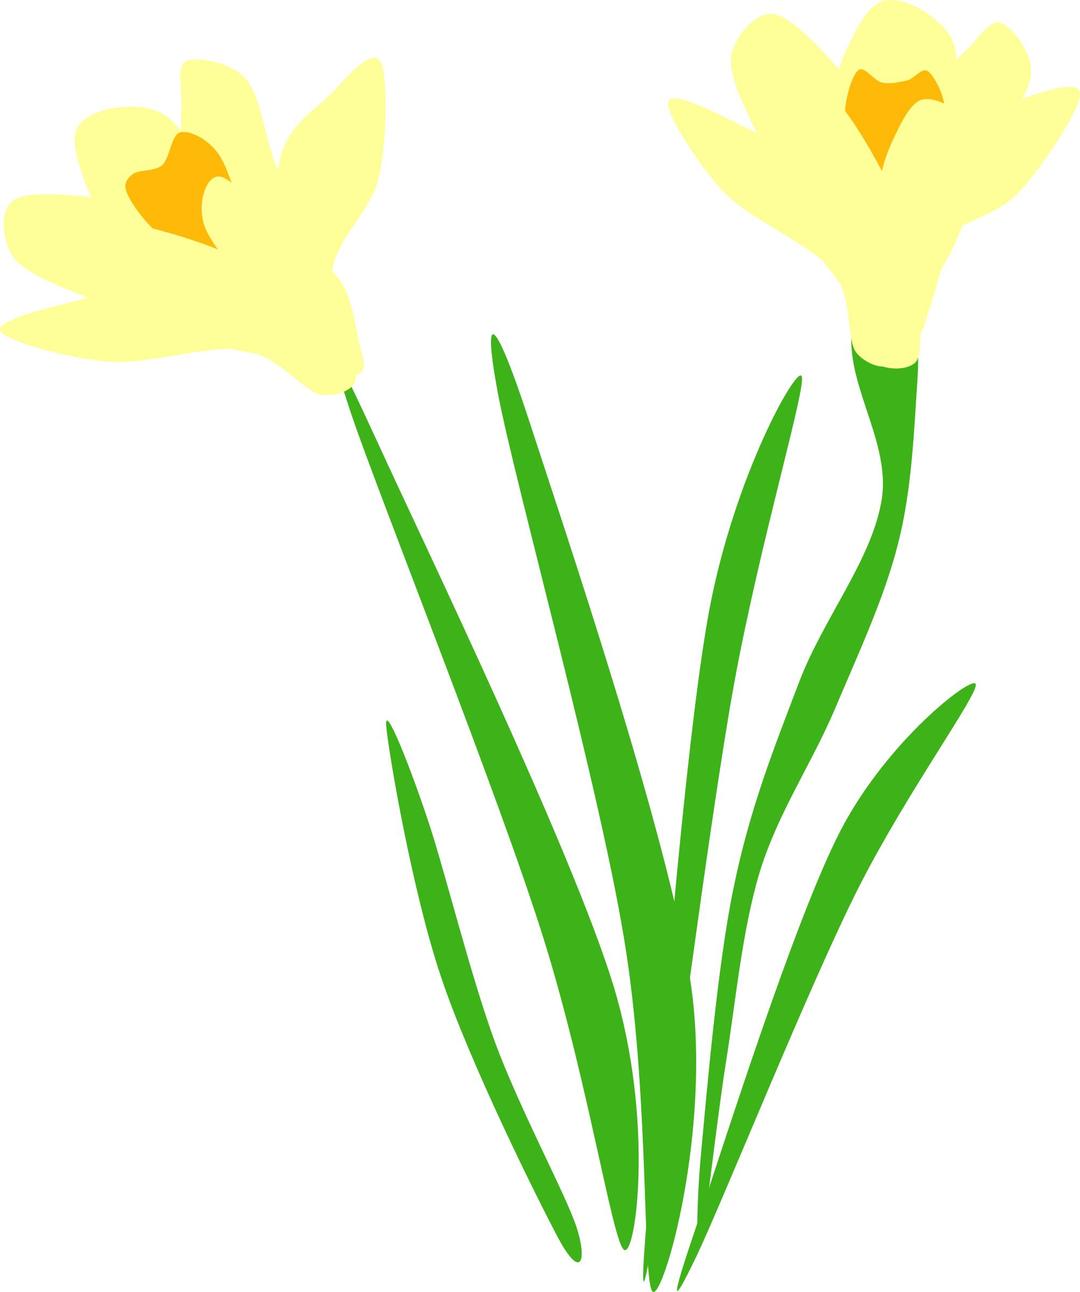 Daffodils are up! png transparent